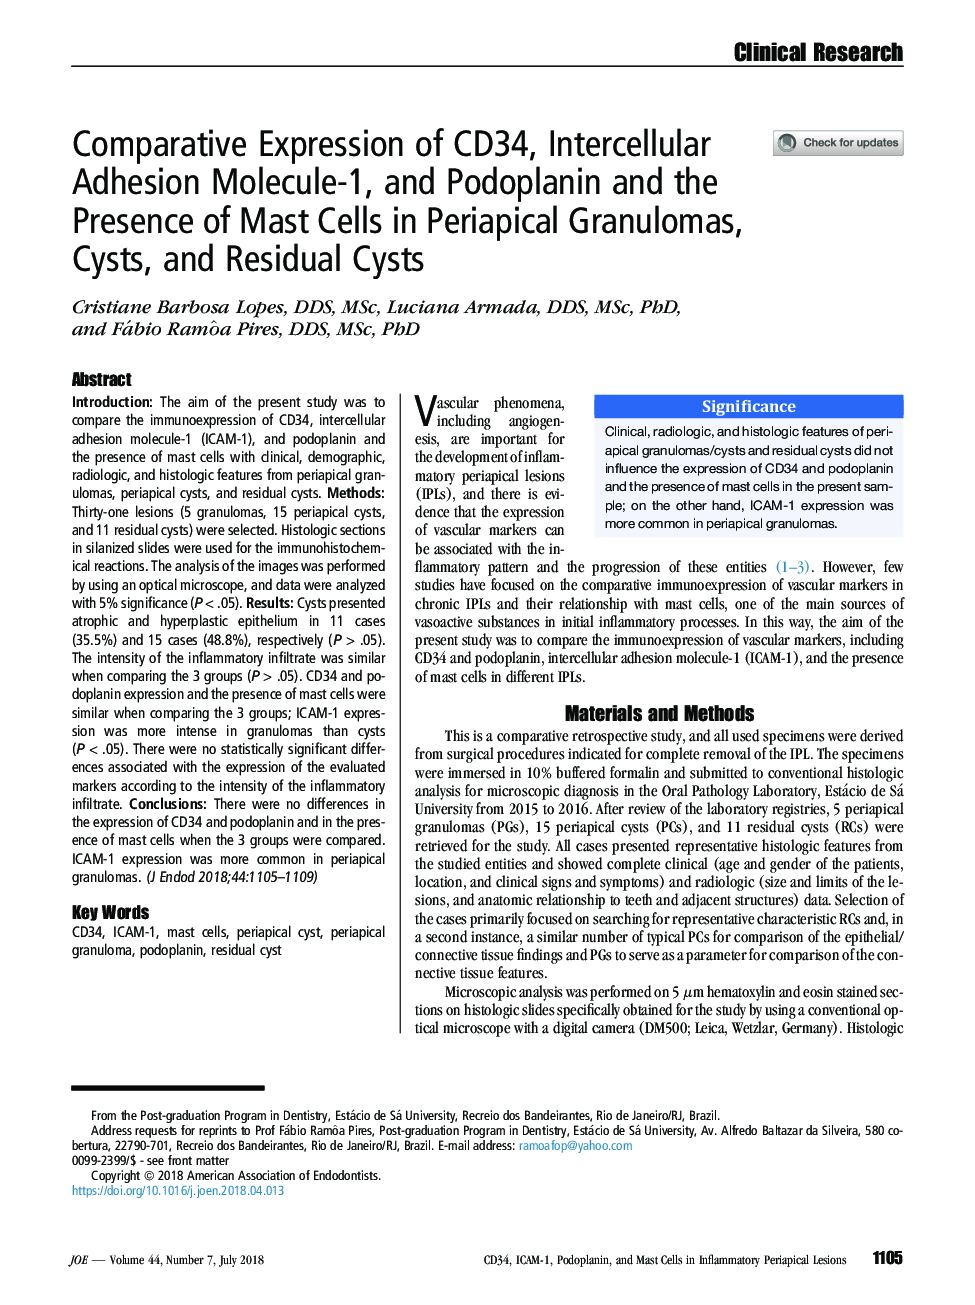 Comparative Expression of CD34, Intercellular Adhesion Molecule-1, and Podoplanin and the Presence of Mast Cells in Periapical Granulomas, Cysts, and Residual Cysts